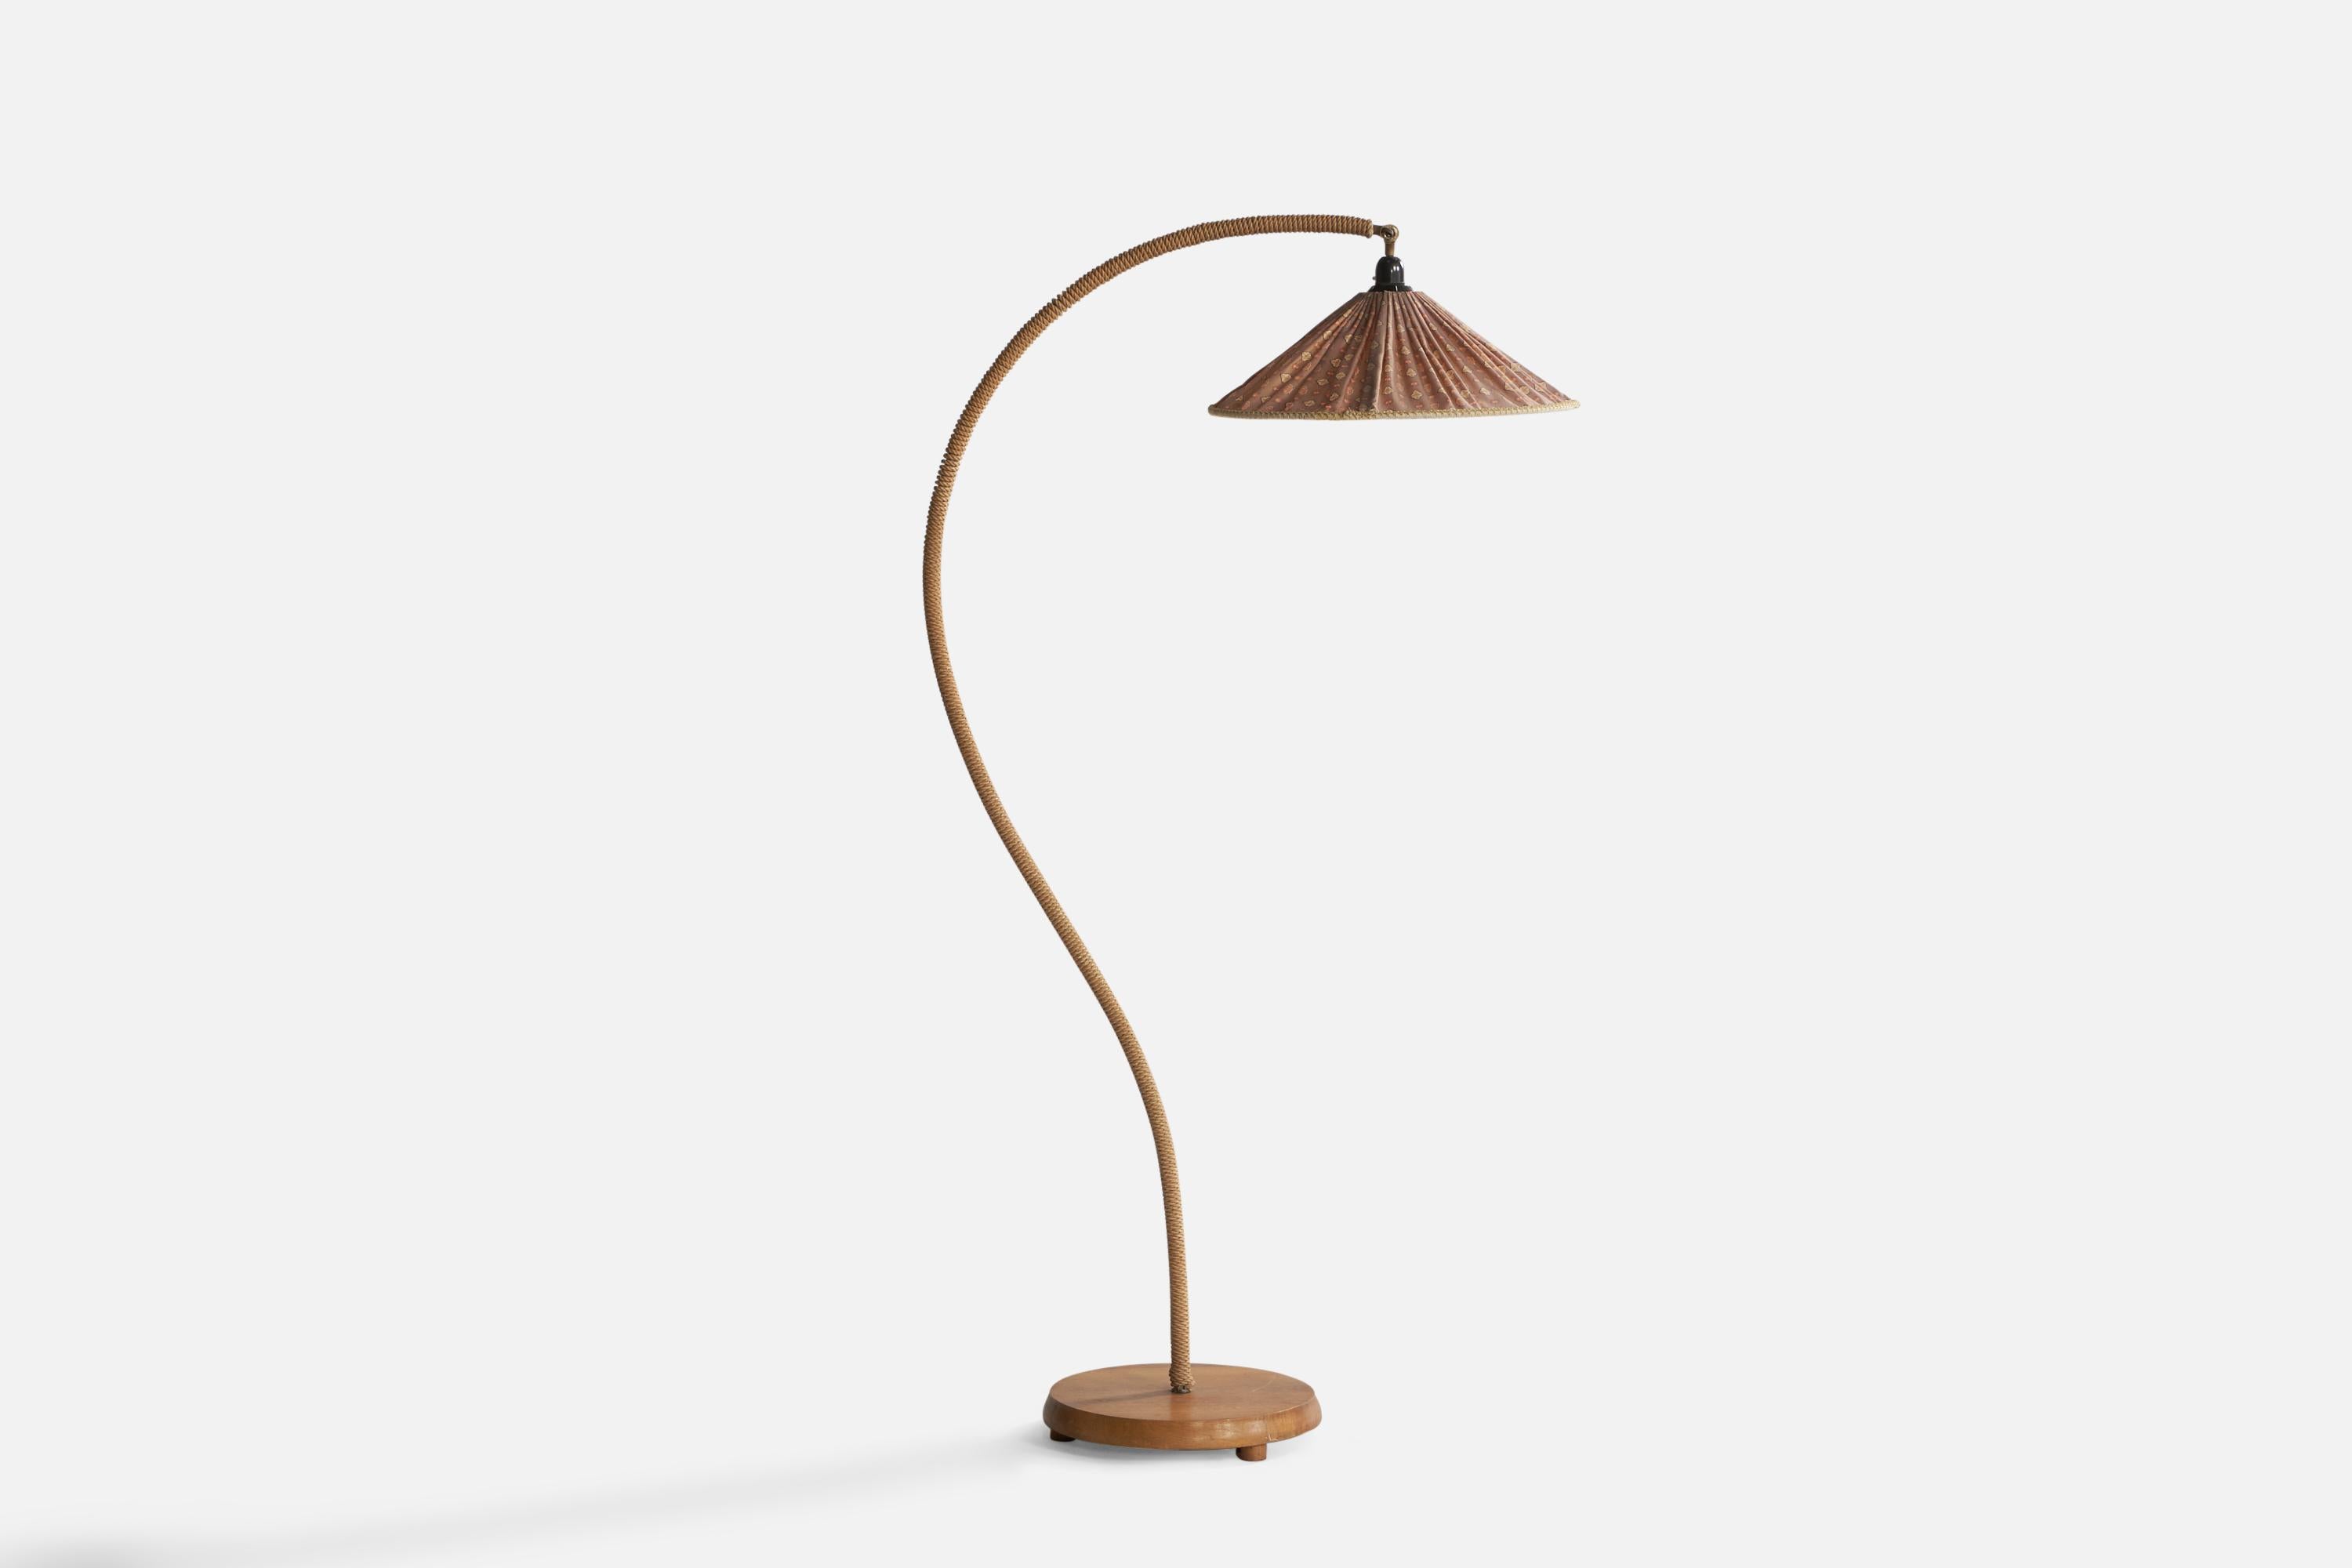 An adjustable brass, rope elm and fabric floor lamp designed and produced in Sweden, 1940s.

Overall Dimensions (inches): 59.65” H x 17.75” W x 31.25” Depth. Stated dimensions include shade.
Dimensions vary based on angle of light.
Bulb